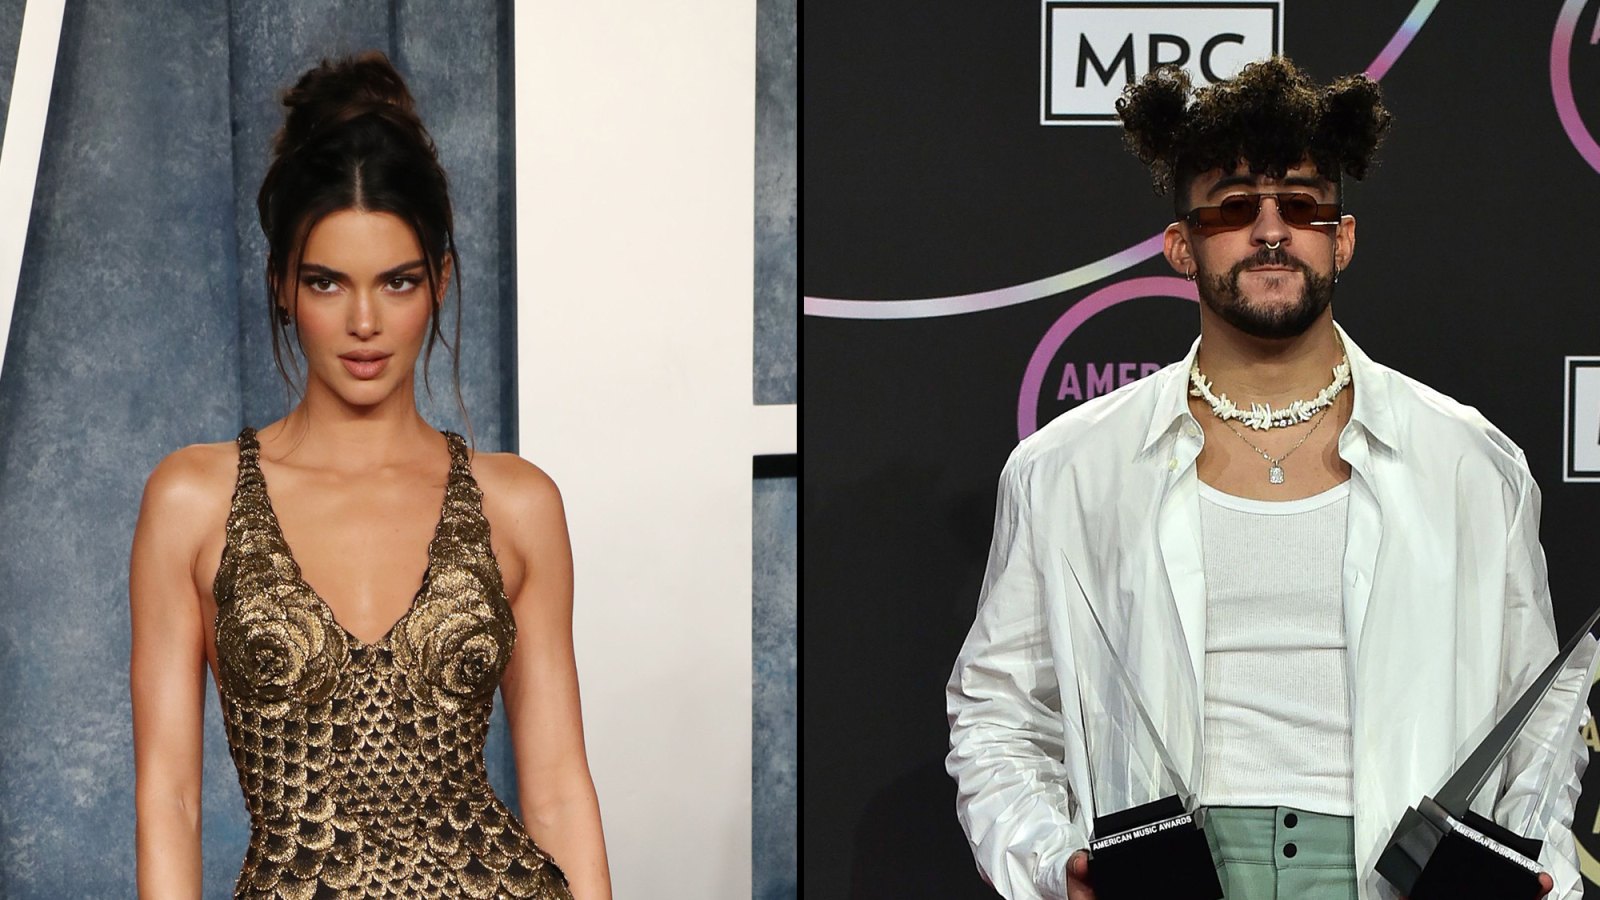 Kendall Jenner's Feelings for Bad Bunny are Starting to Grow